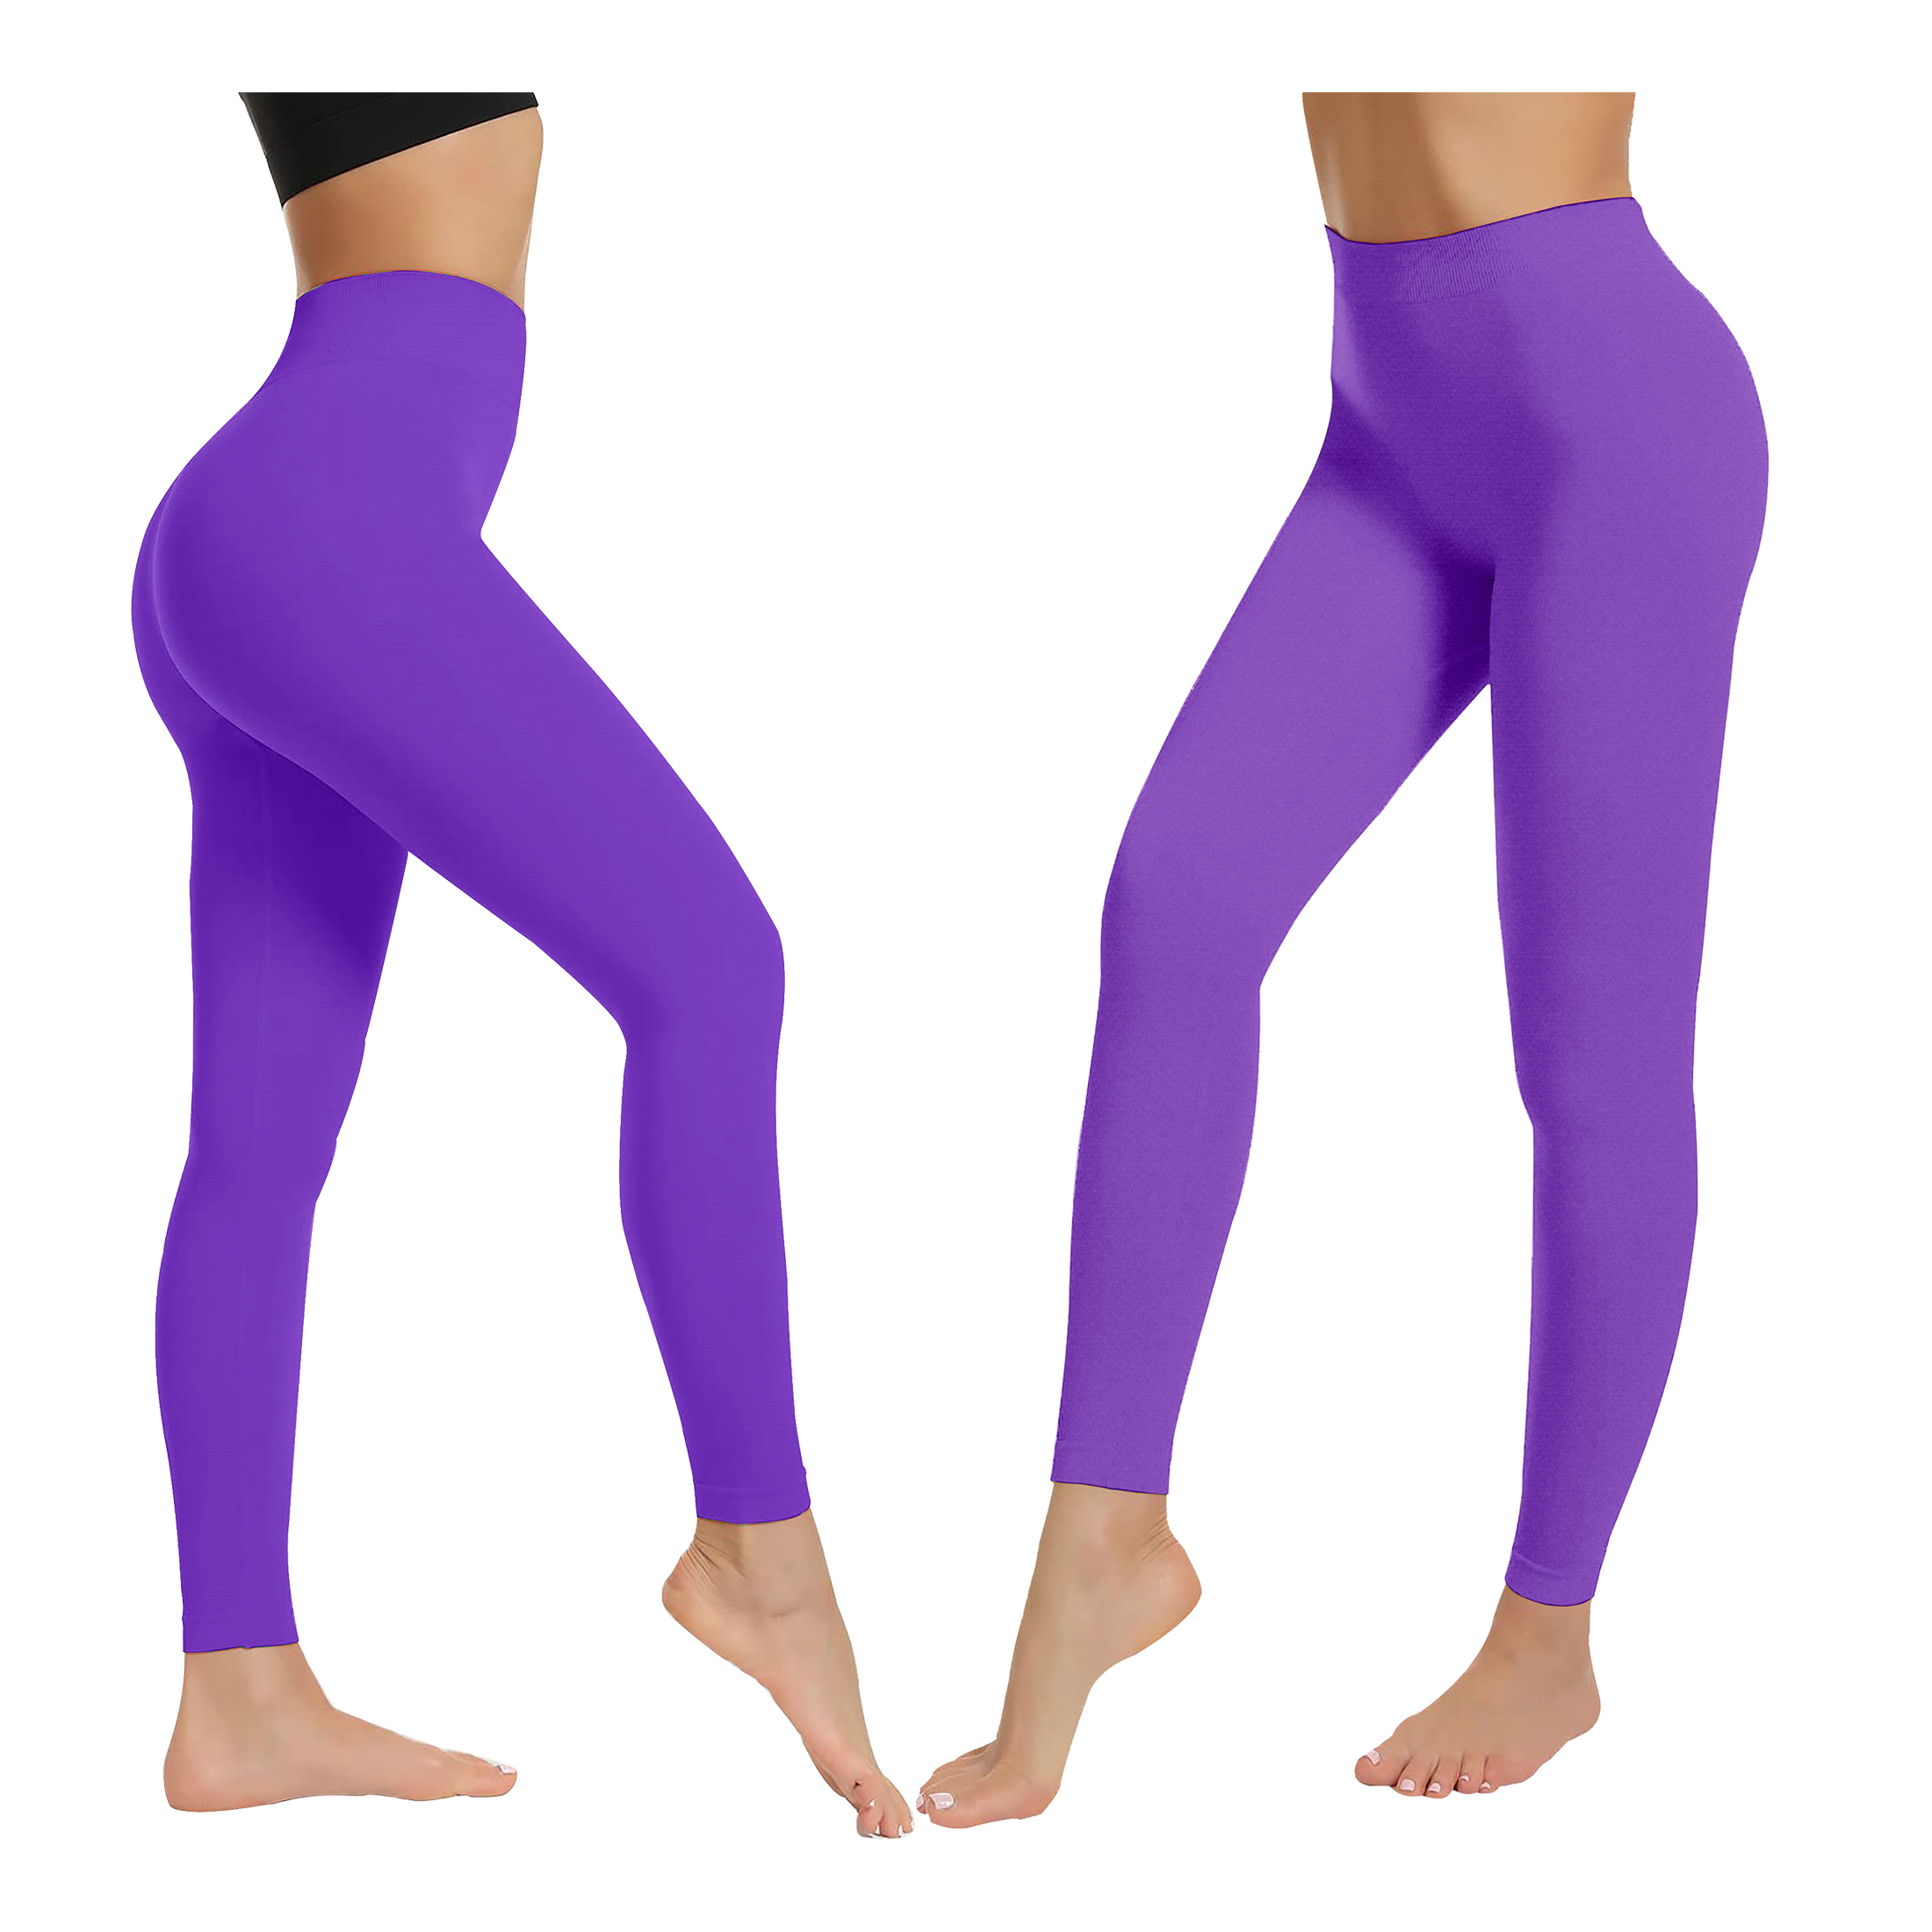 1-Pack: Women's High-Waist Ultra-Soft Stretchy Solid Fitness Yoga Leggings Pants - XS